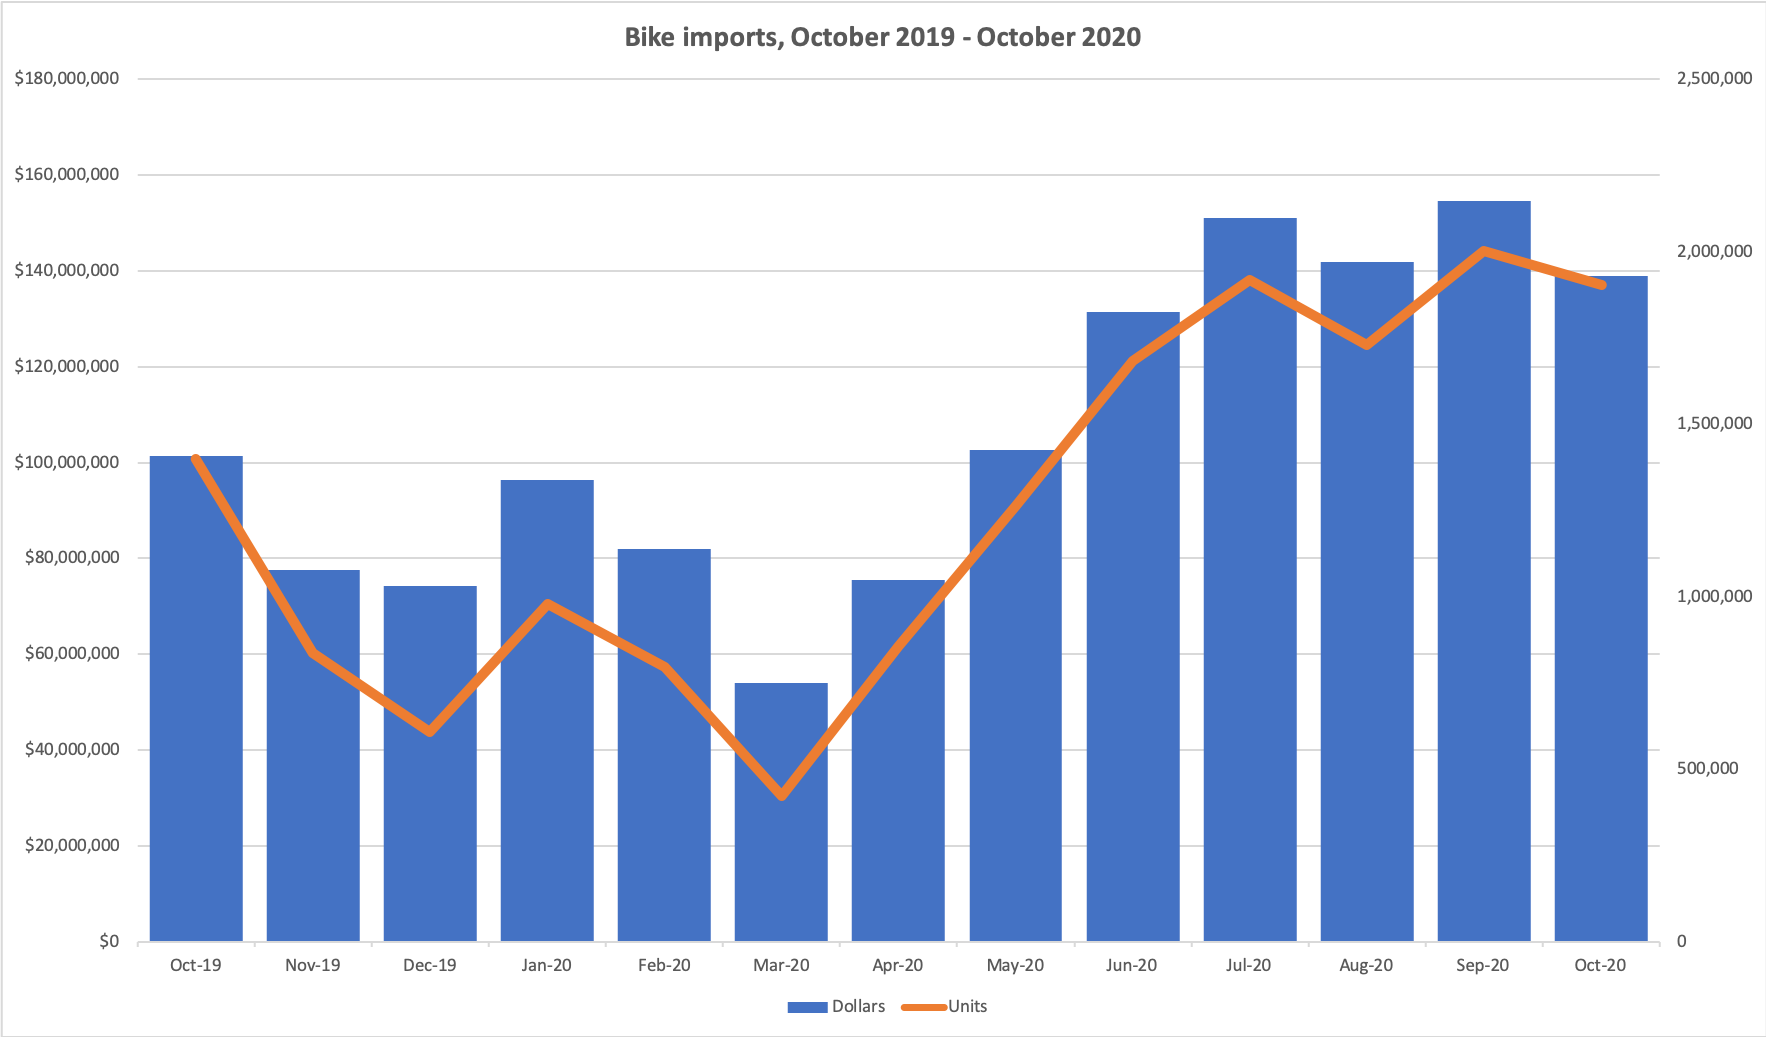 Bike imports, dollars and units. Source: US Department of Commerce.